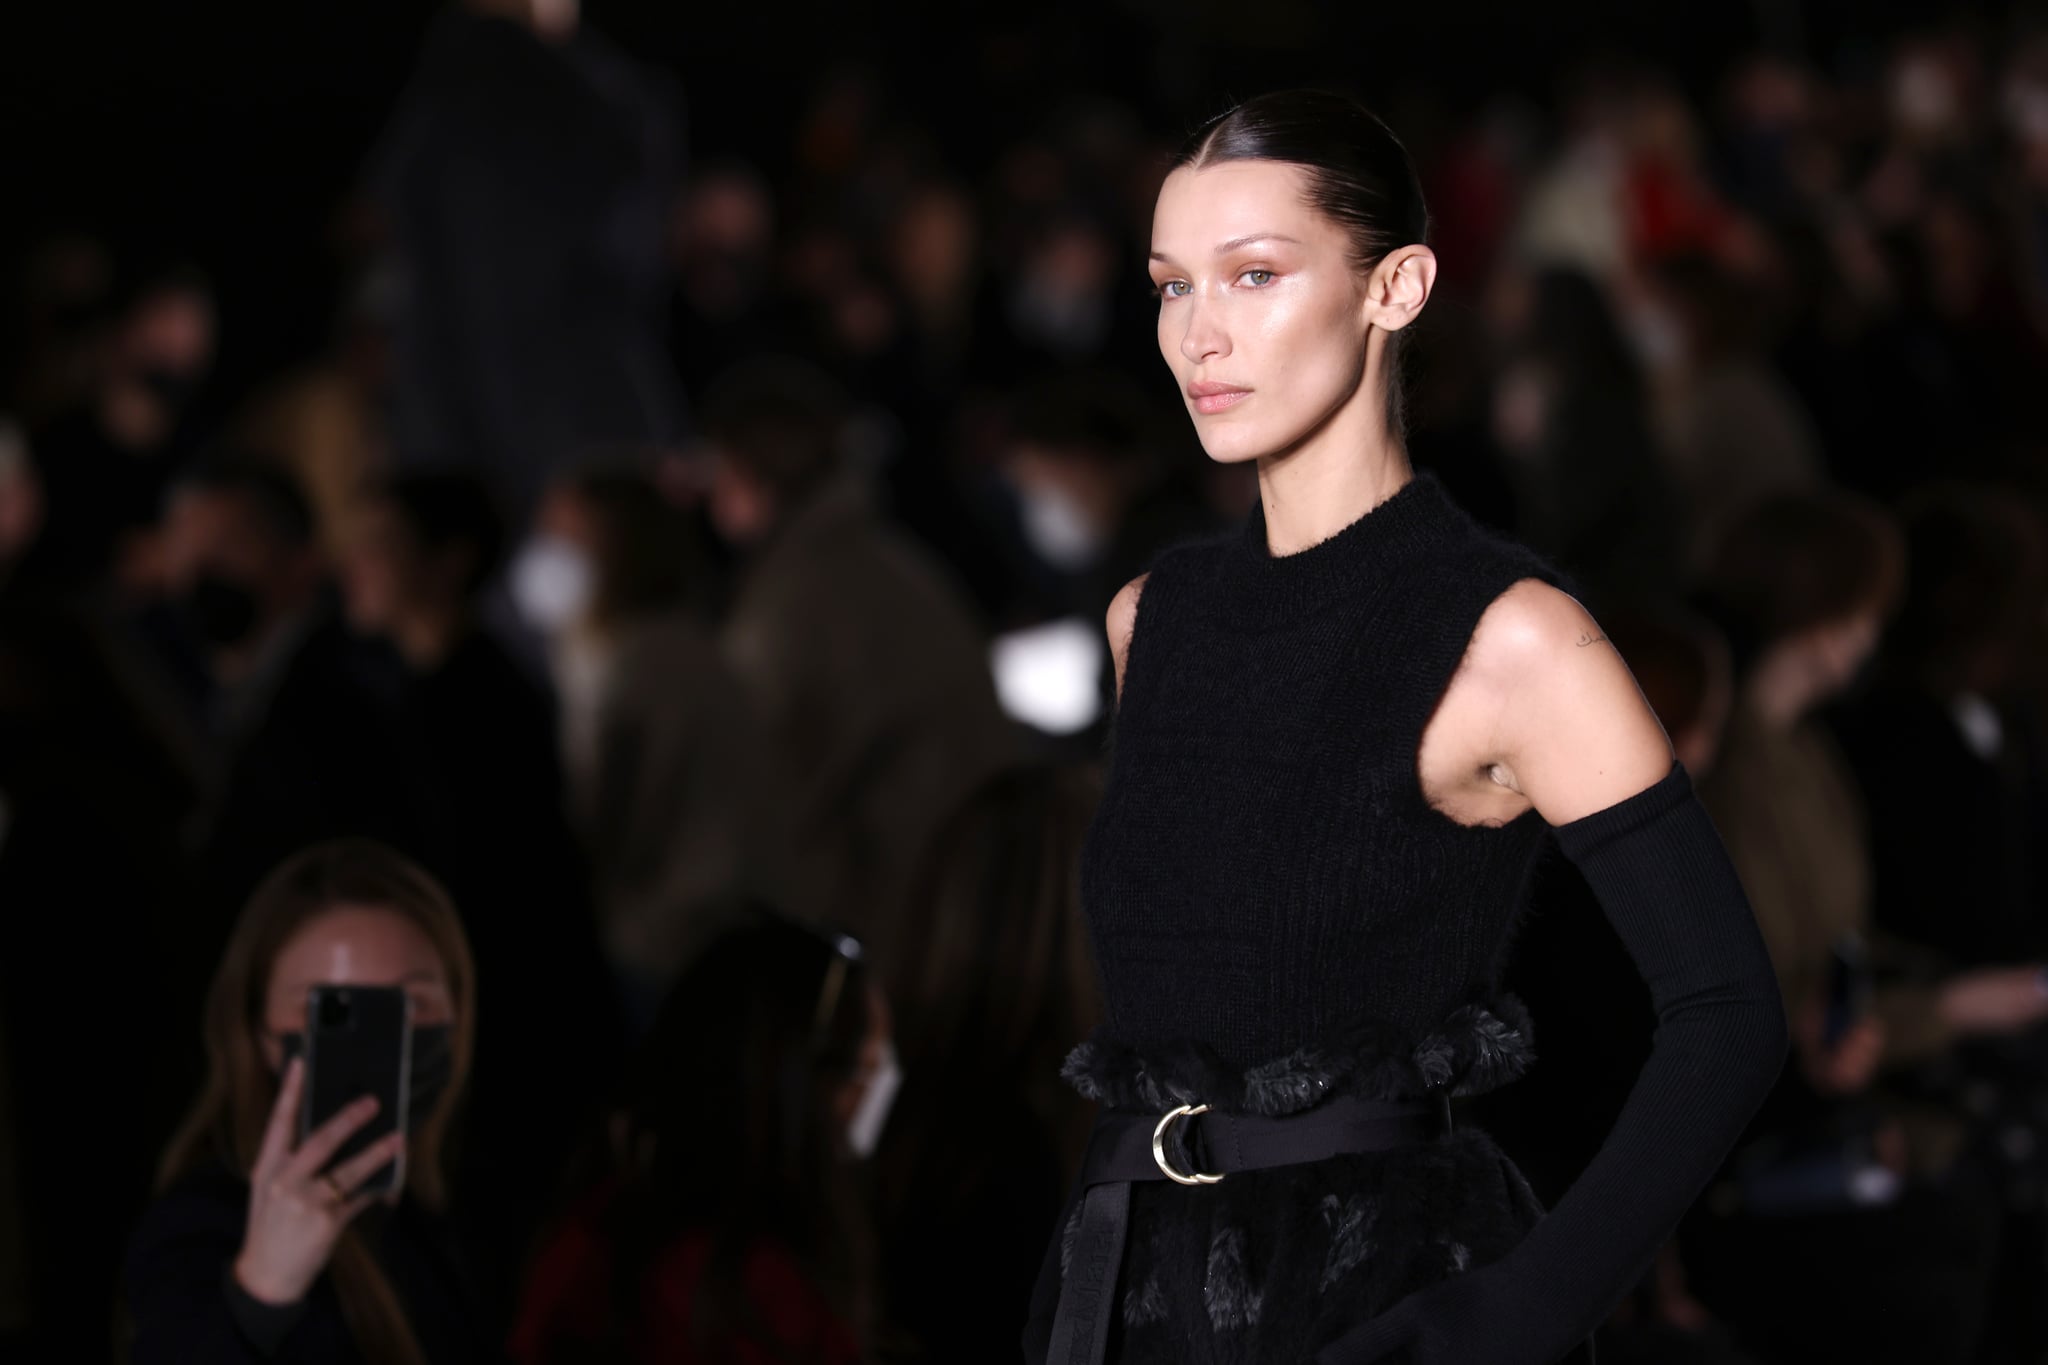 MILAN, ITALY - FEBRUARY 24: Bella Hadid walks the runway at the Max Mara fashion show during the Milan Fashion Week Fall/Winter 2022/2023 on February 24, 2022 in Milan, Italy. (Photo by Vittorio Zunino Celotto/Getty Images)